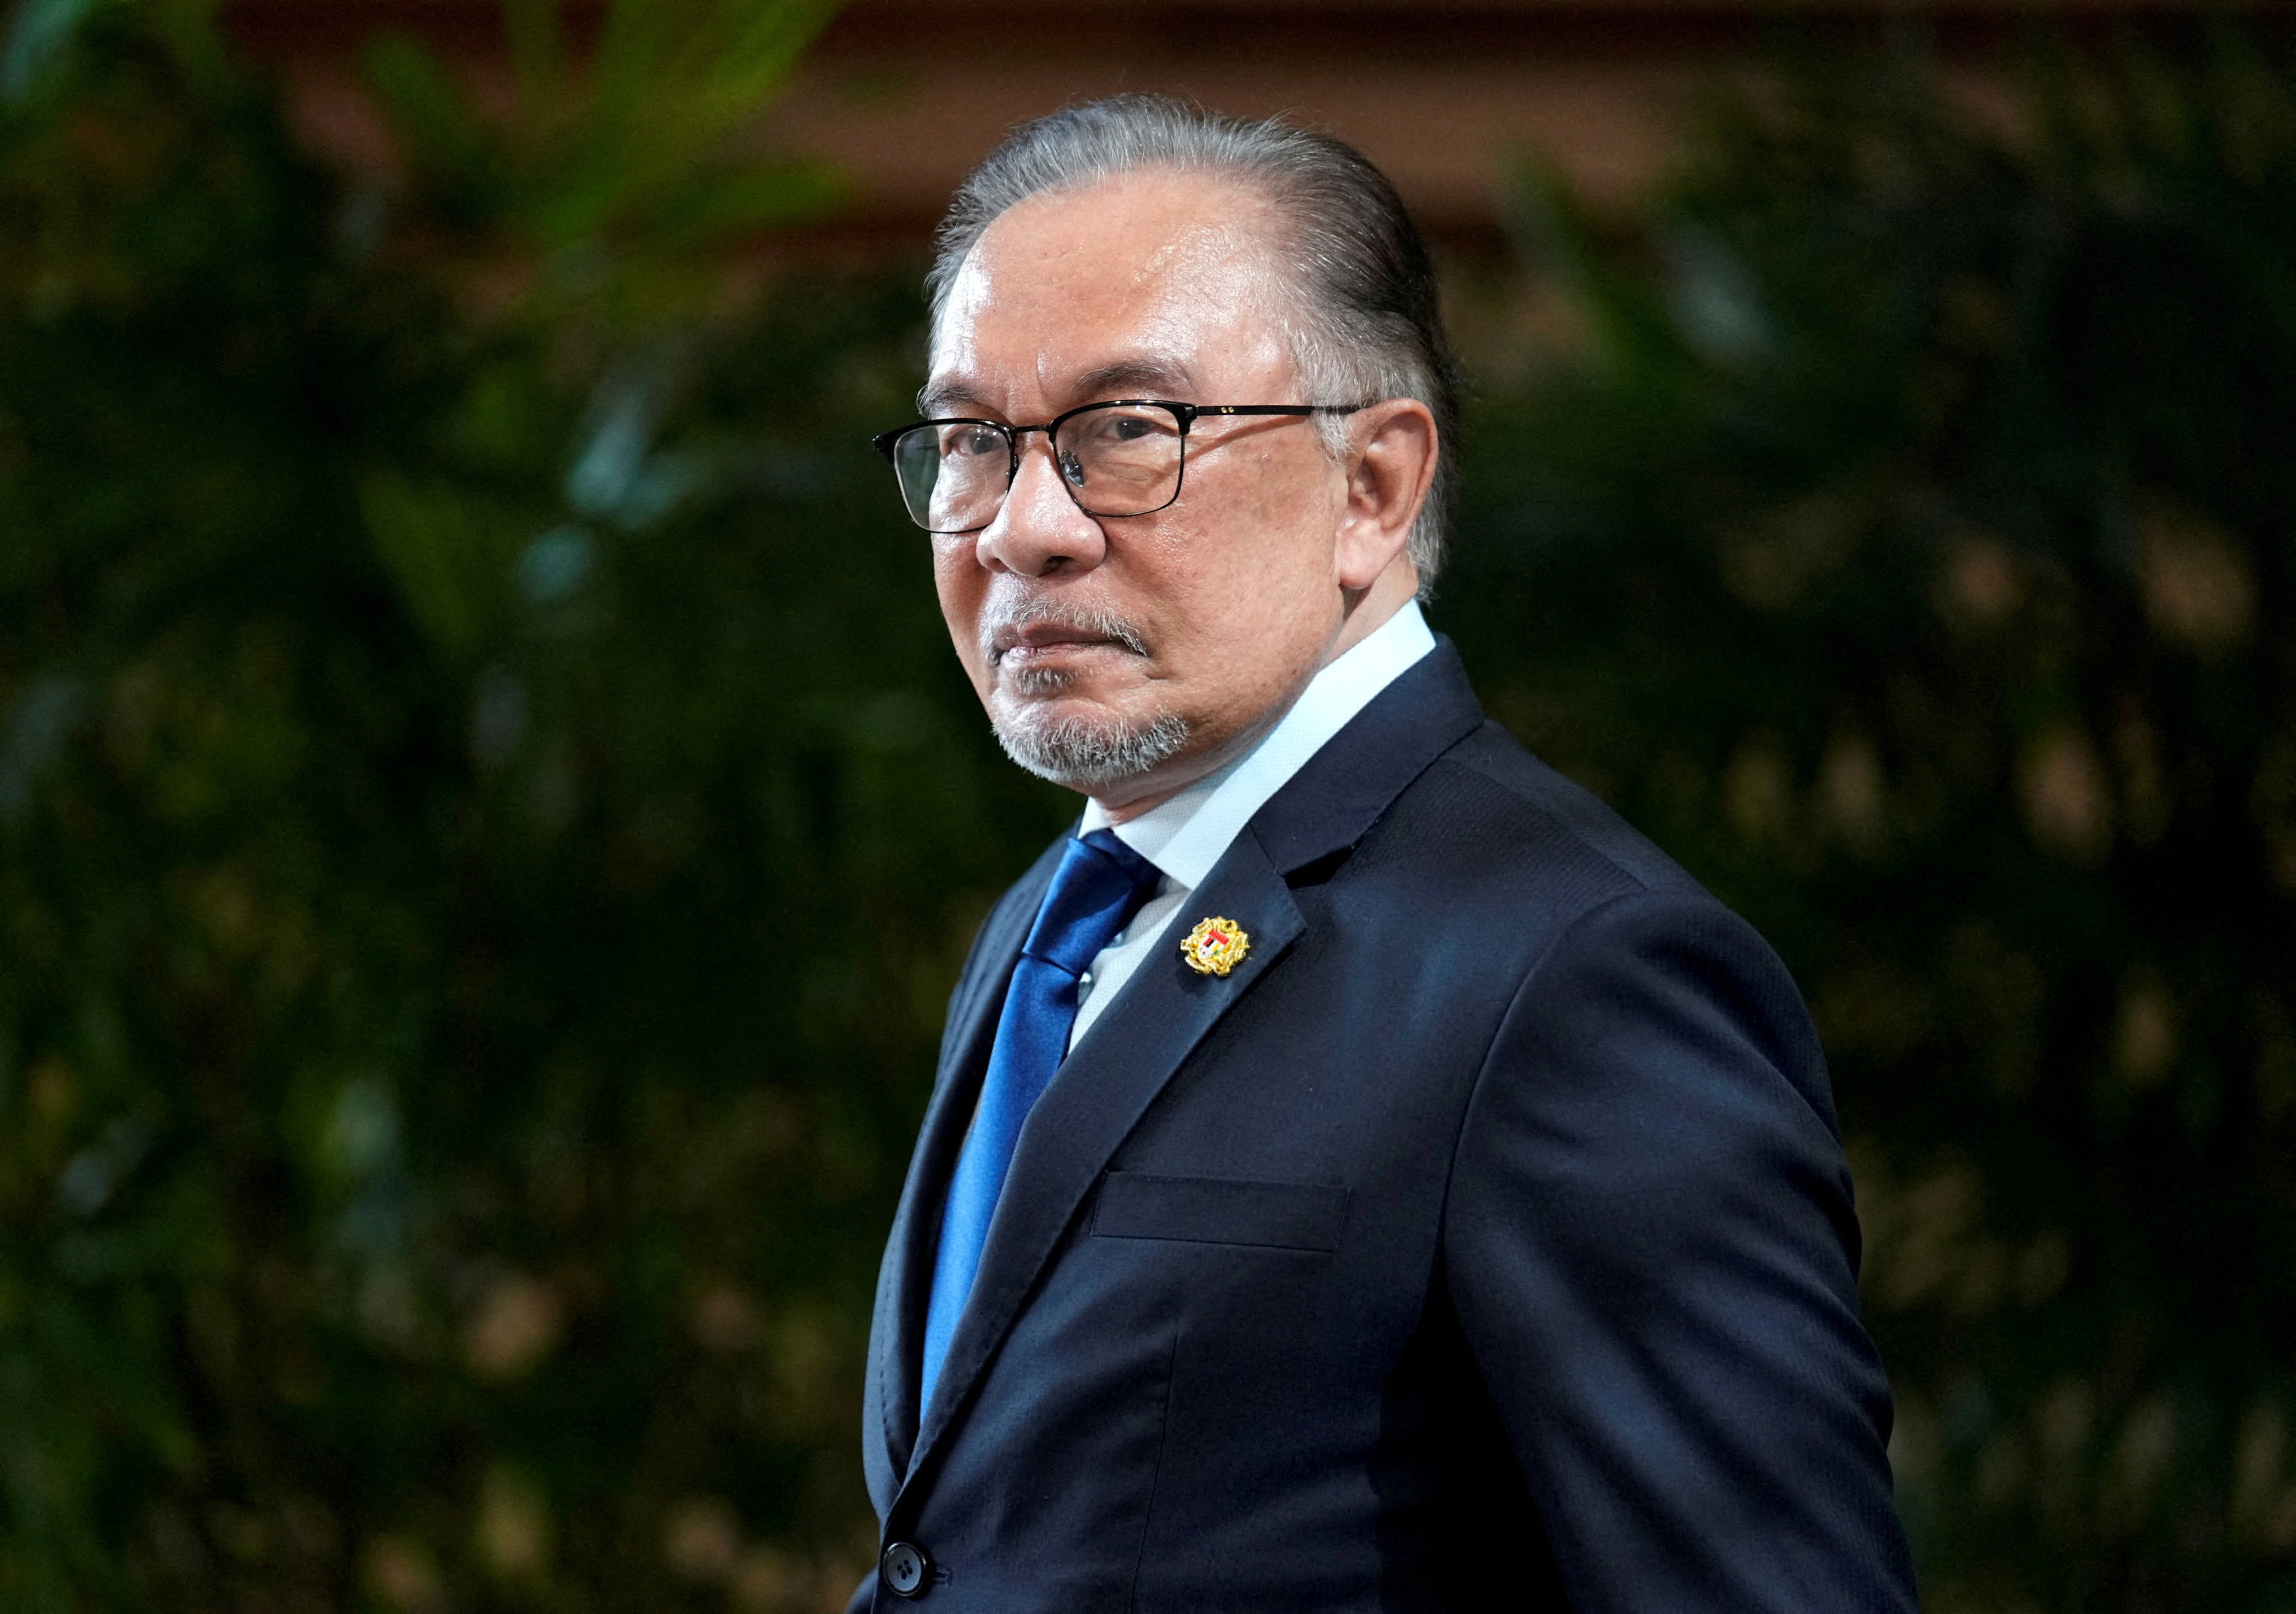 Malaysian Prime Minister Anwar Ibrahim has declined repeated invites to visit Russia. Photo: Reuters/Pool/File